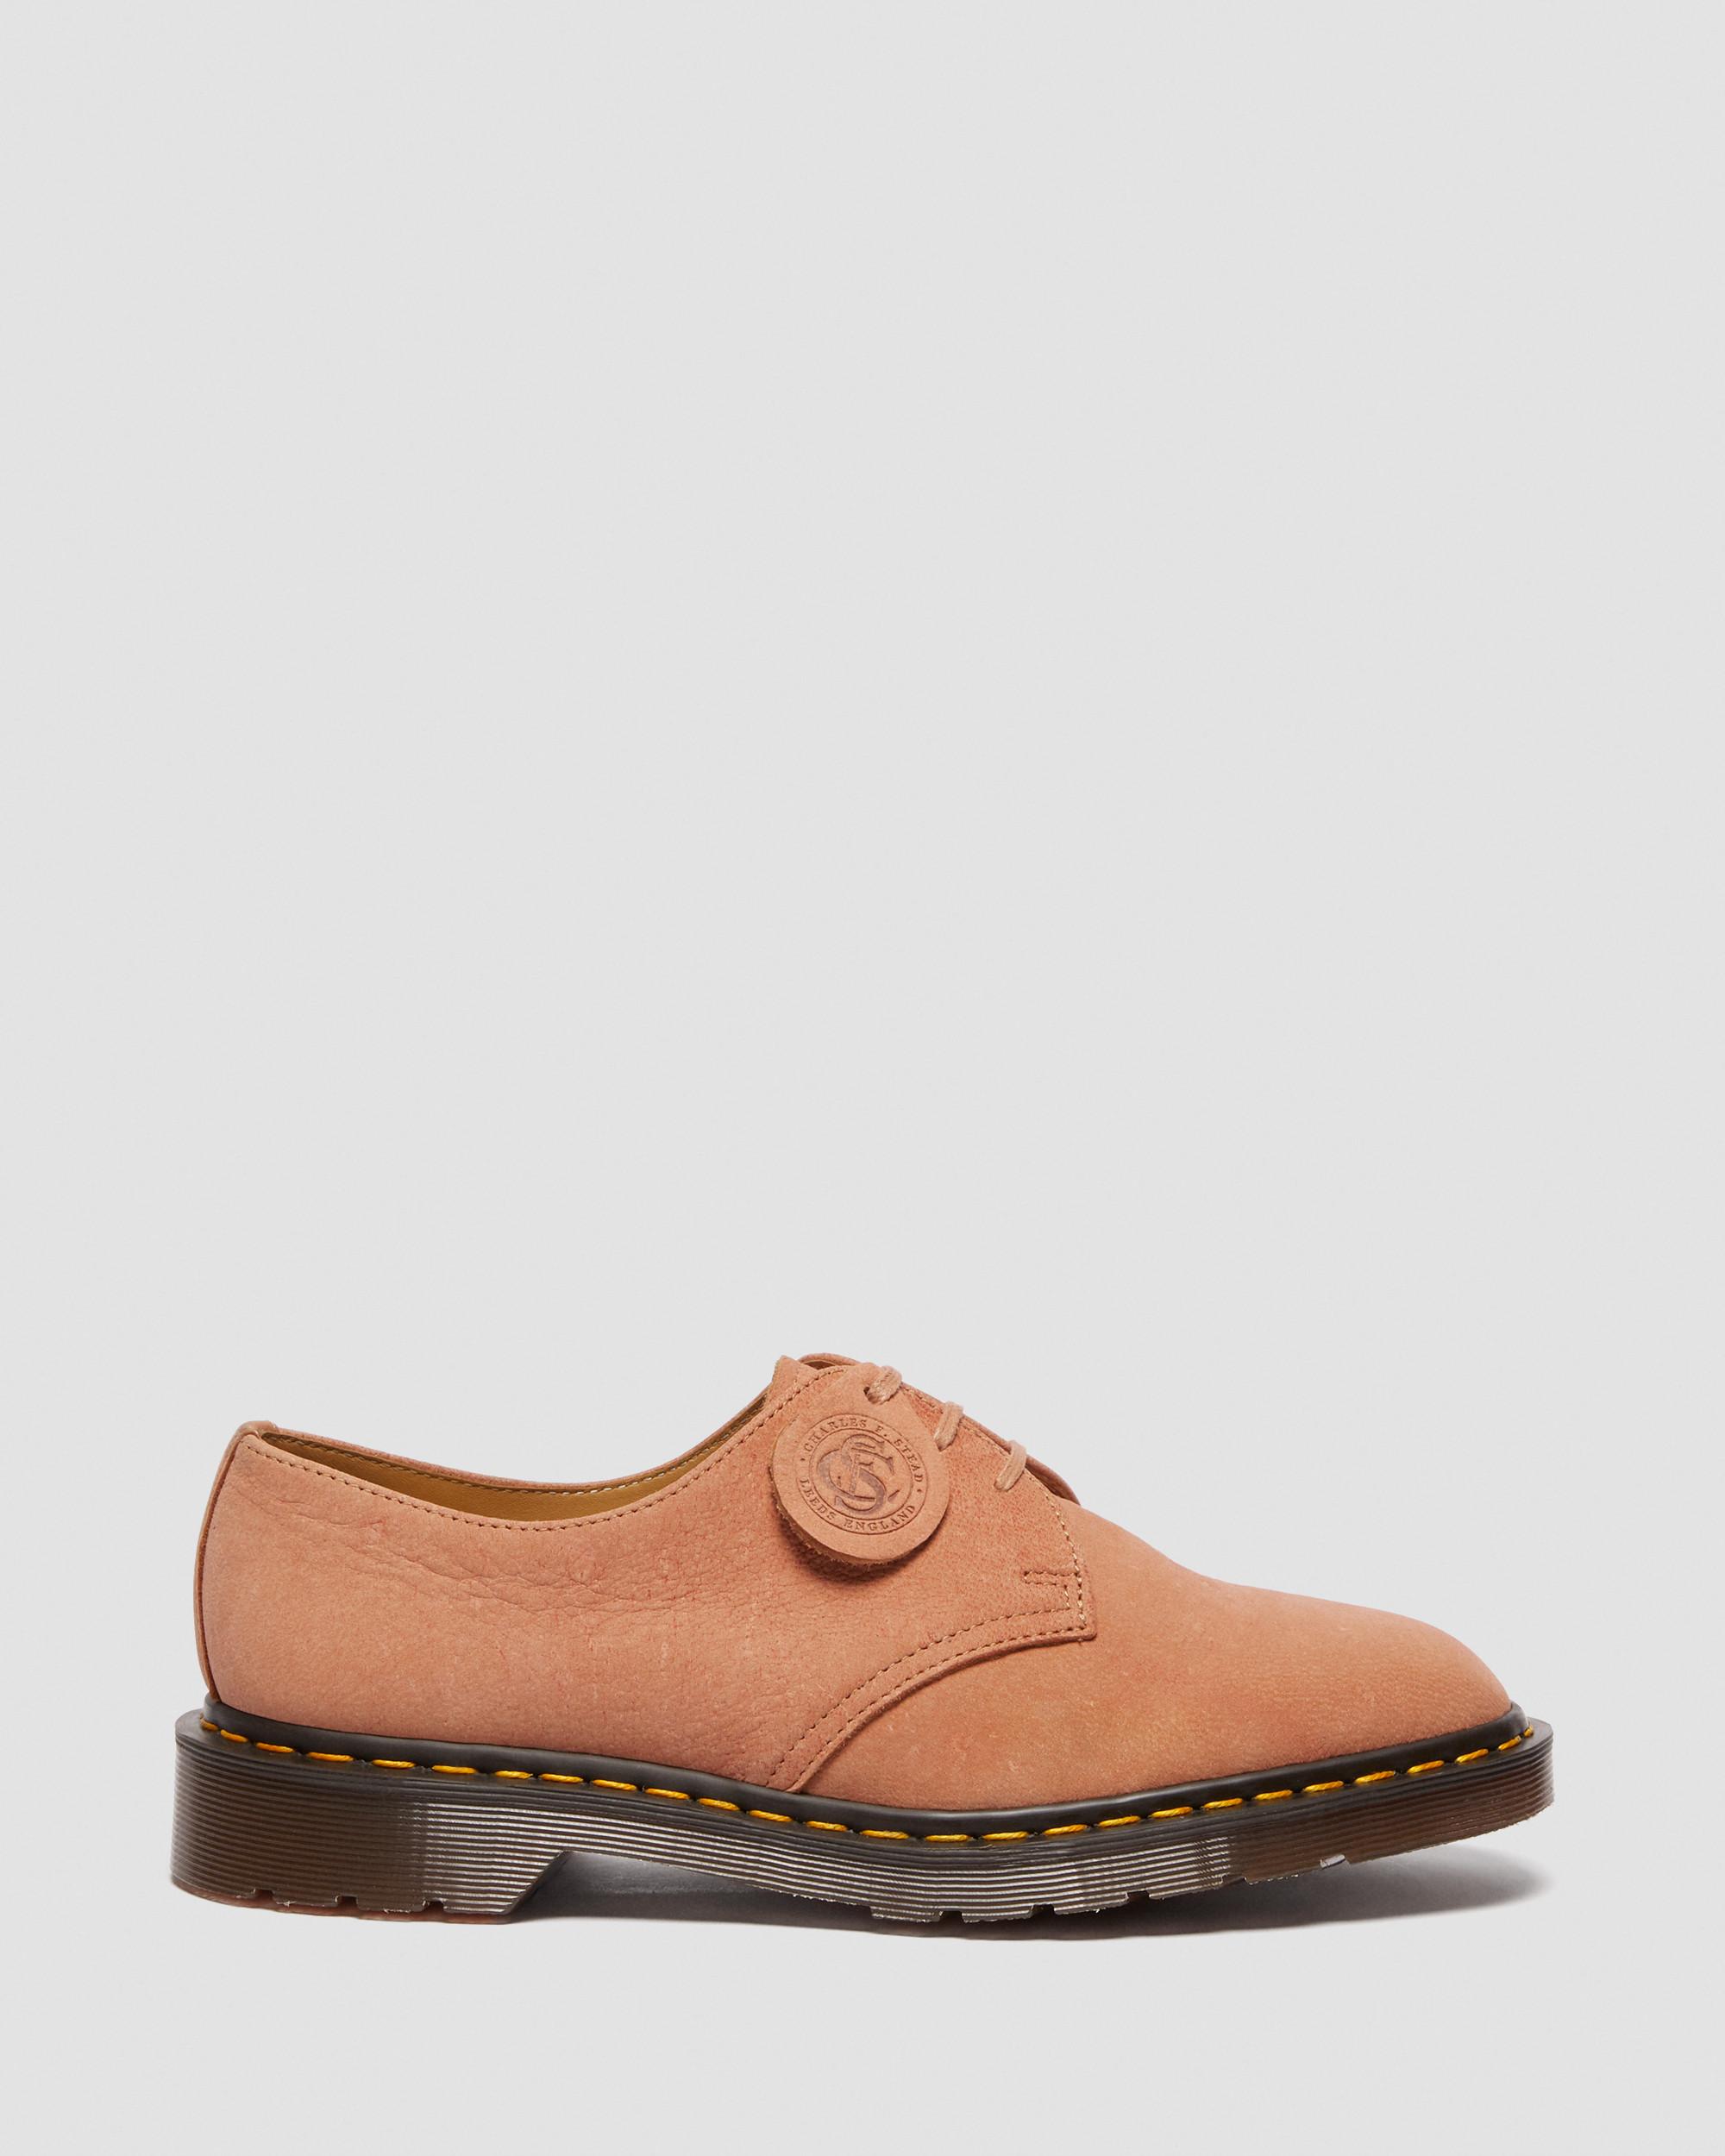 1461 Made in England Nubuck Leather Shoes in Pink | Dr. Martens